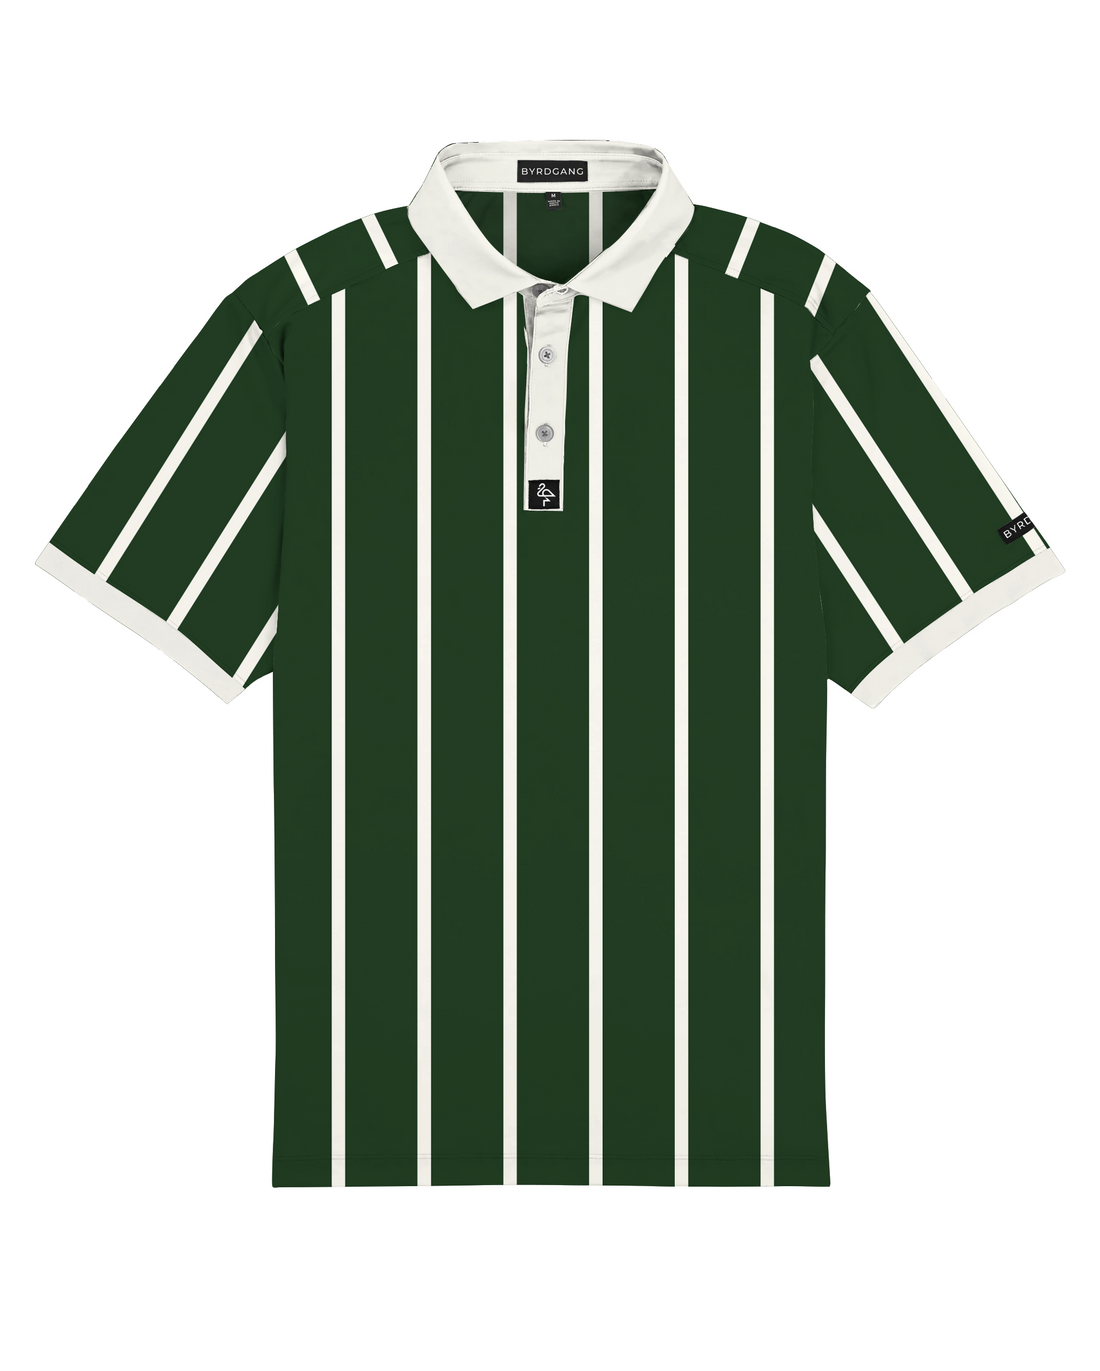 Old Stripes - Green